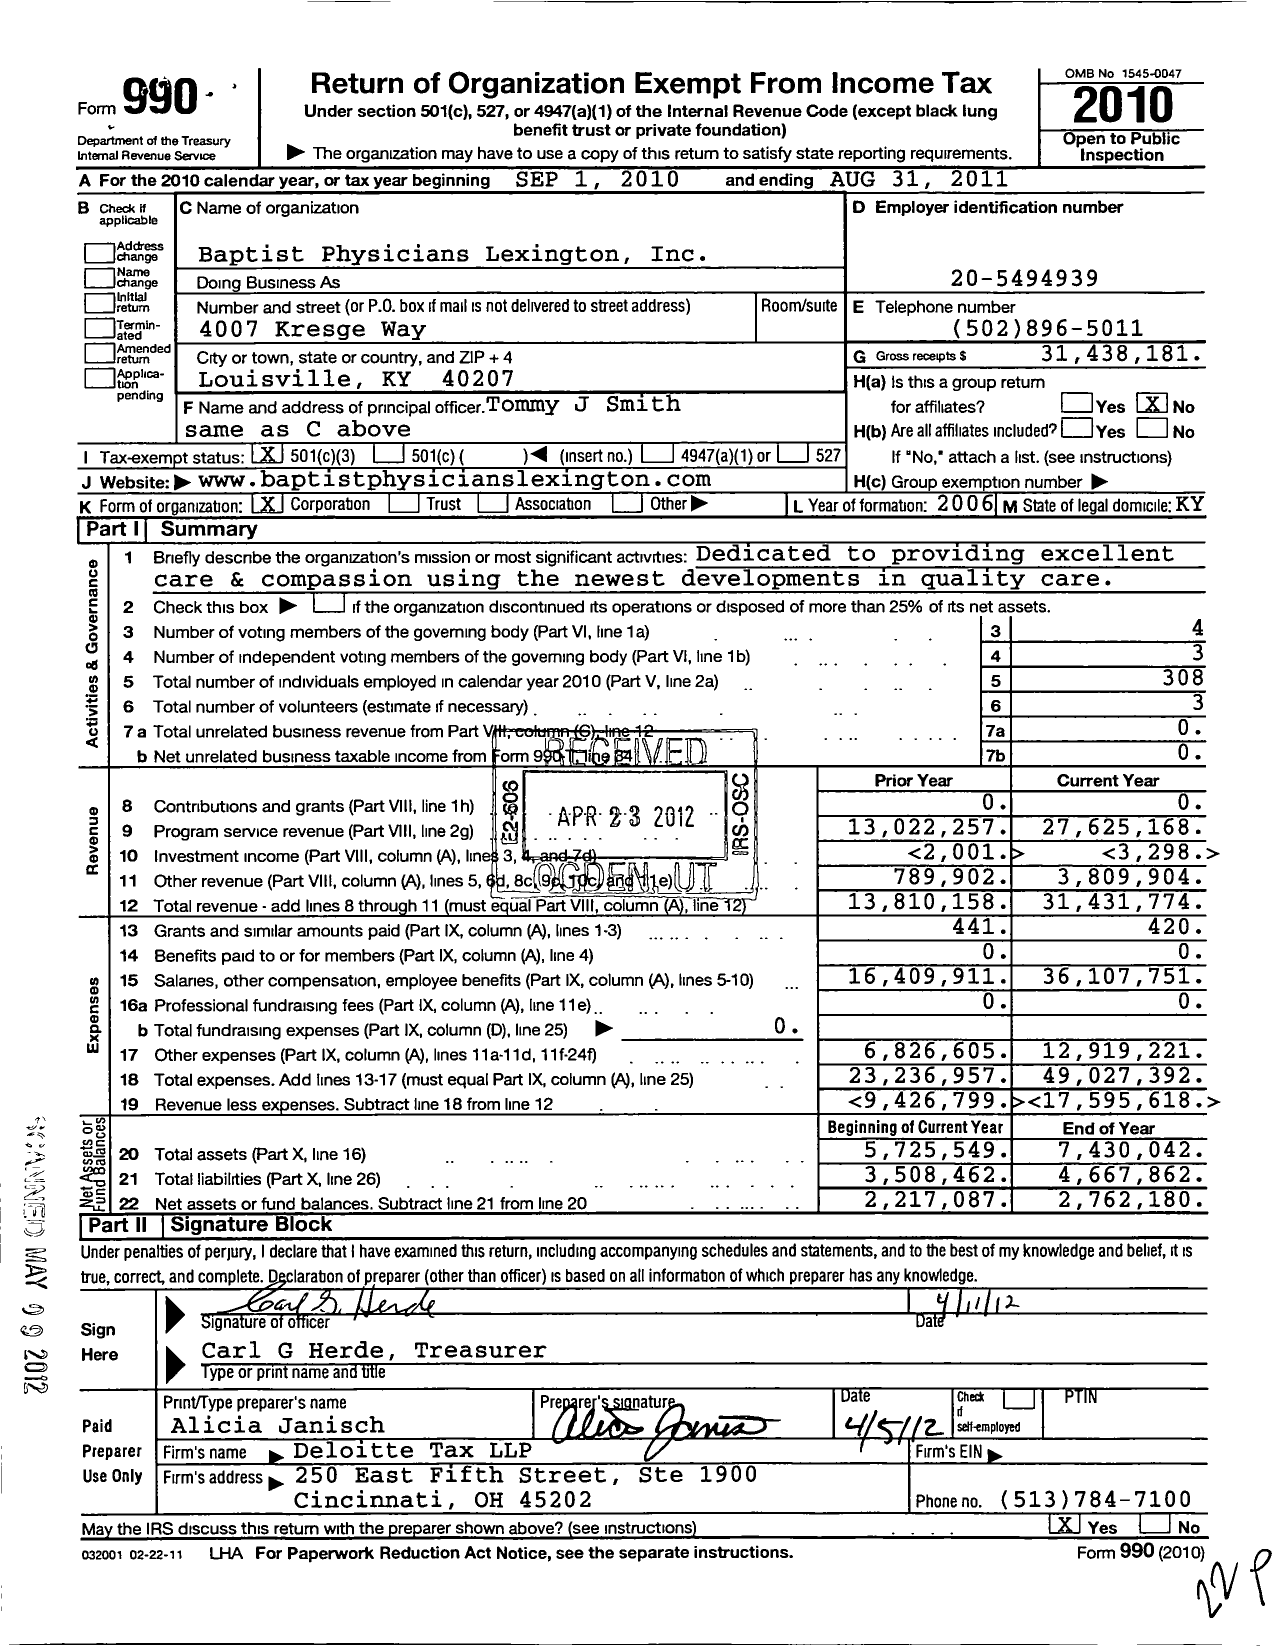 Image of first page of 2010 Form 990 for Baptist Physicians Lexington (BPL)